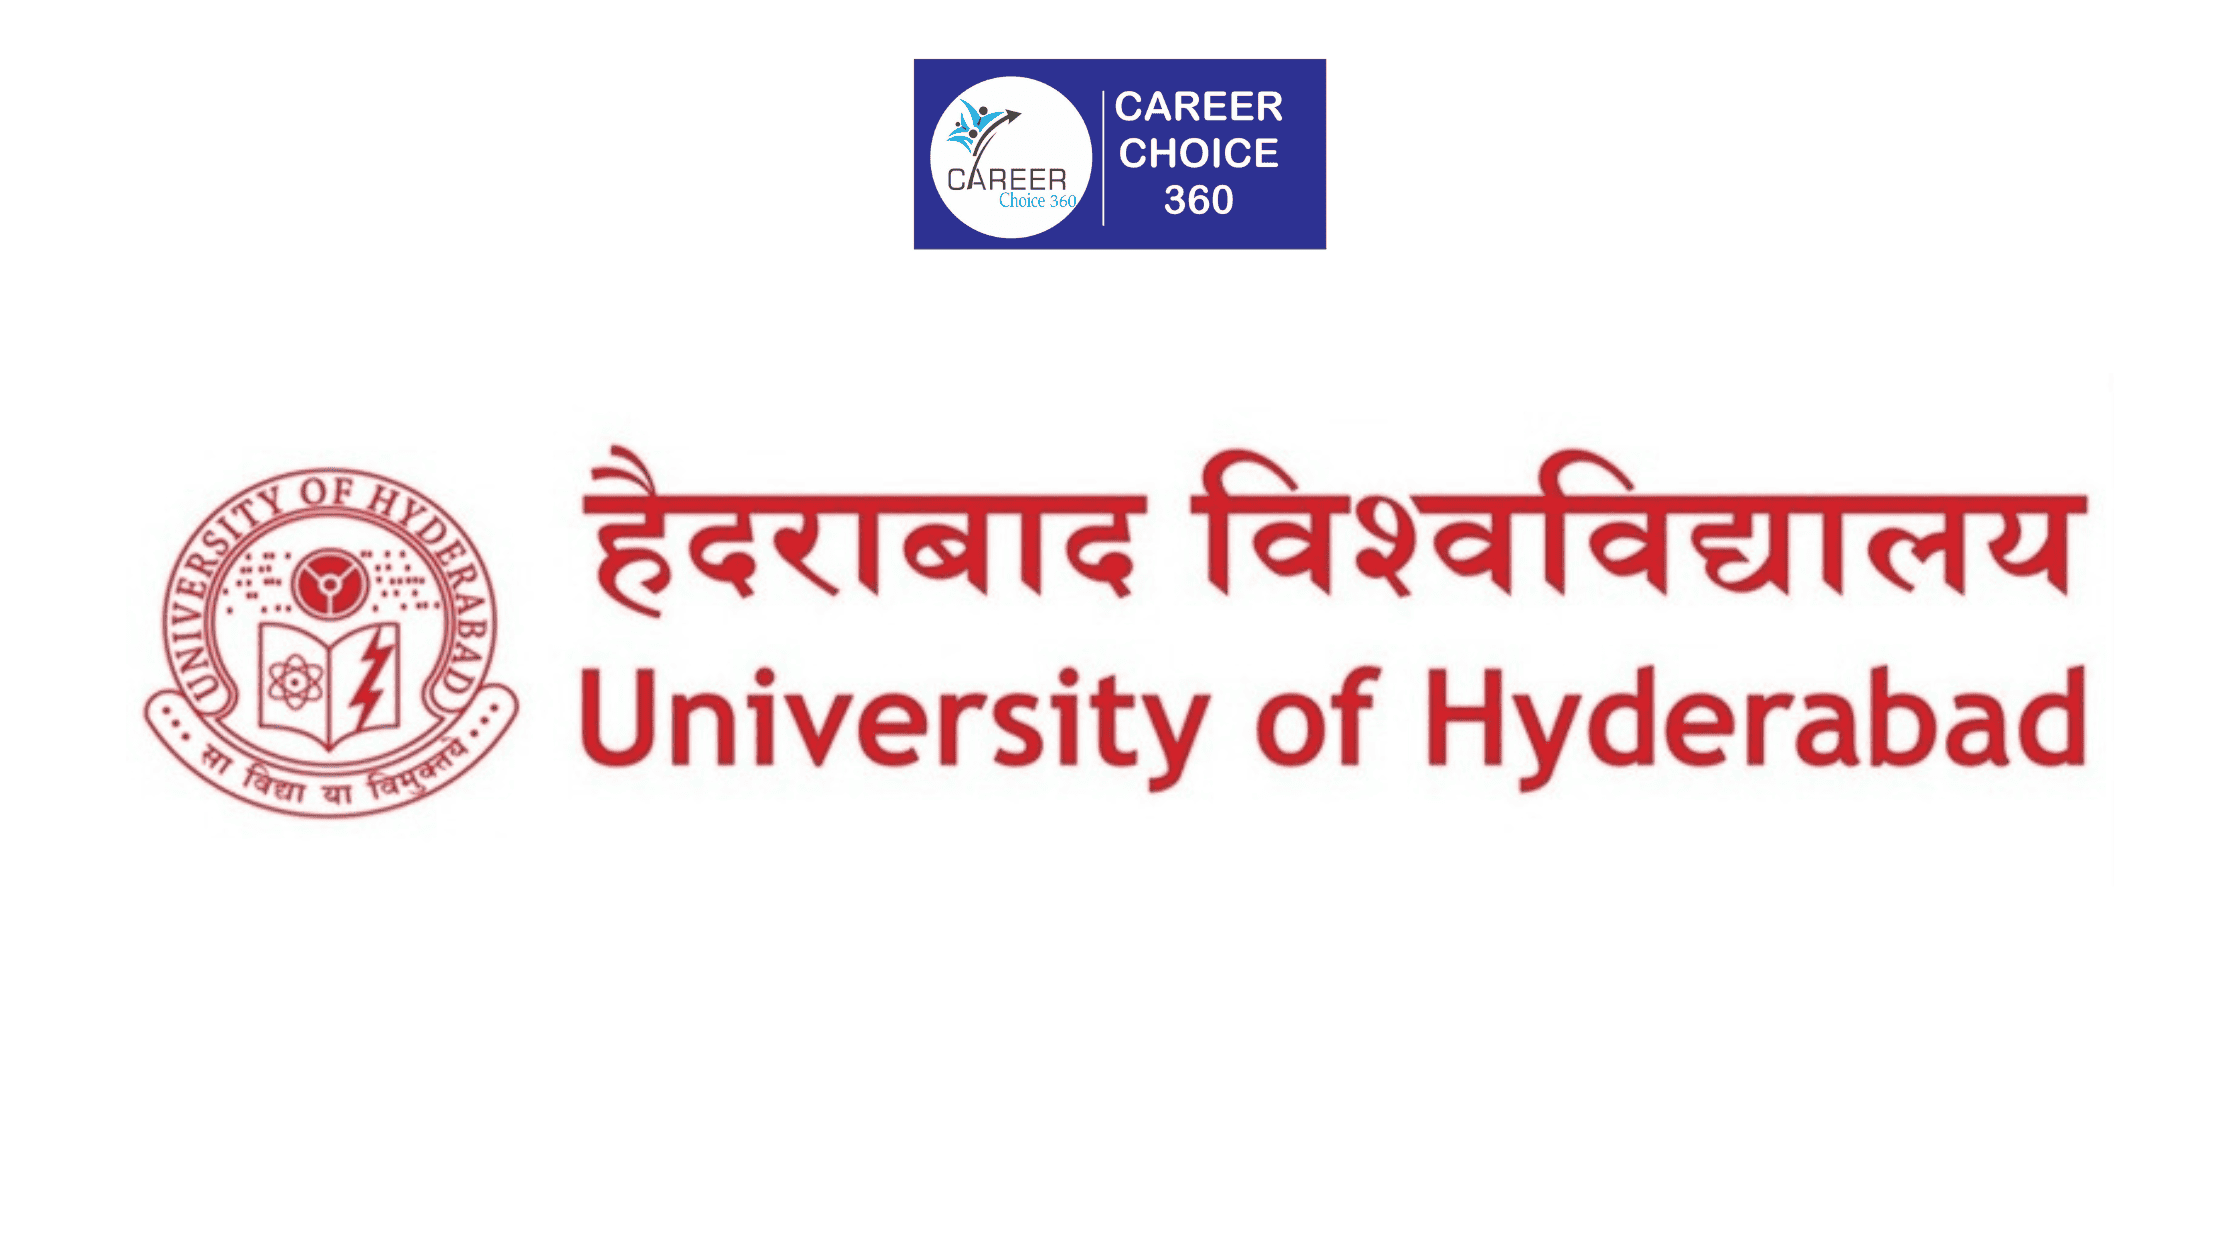 You are currently viewing University of Hyderabad : Highlights, Admission Dates, Courses and Fees, Admission Process, Cutoff, Placements, Rankings, FAQs